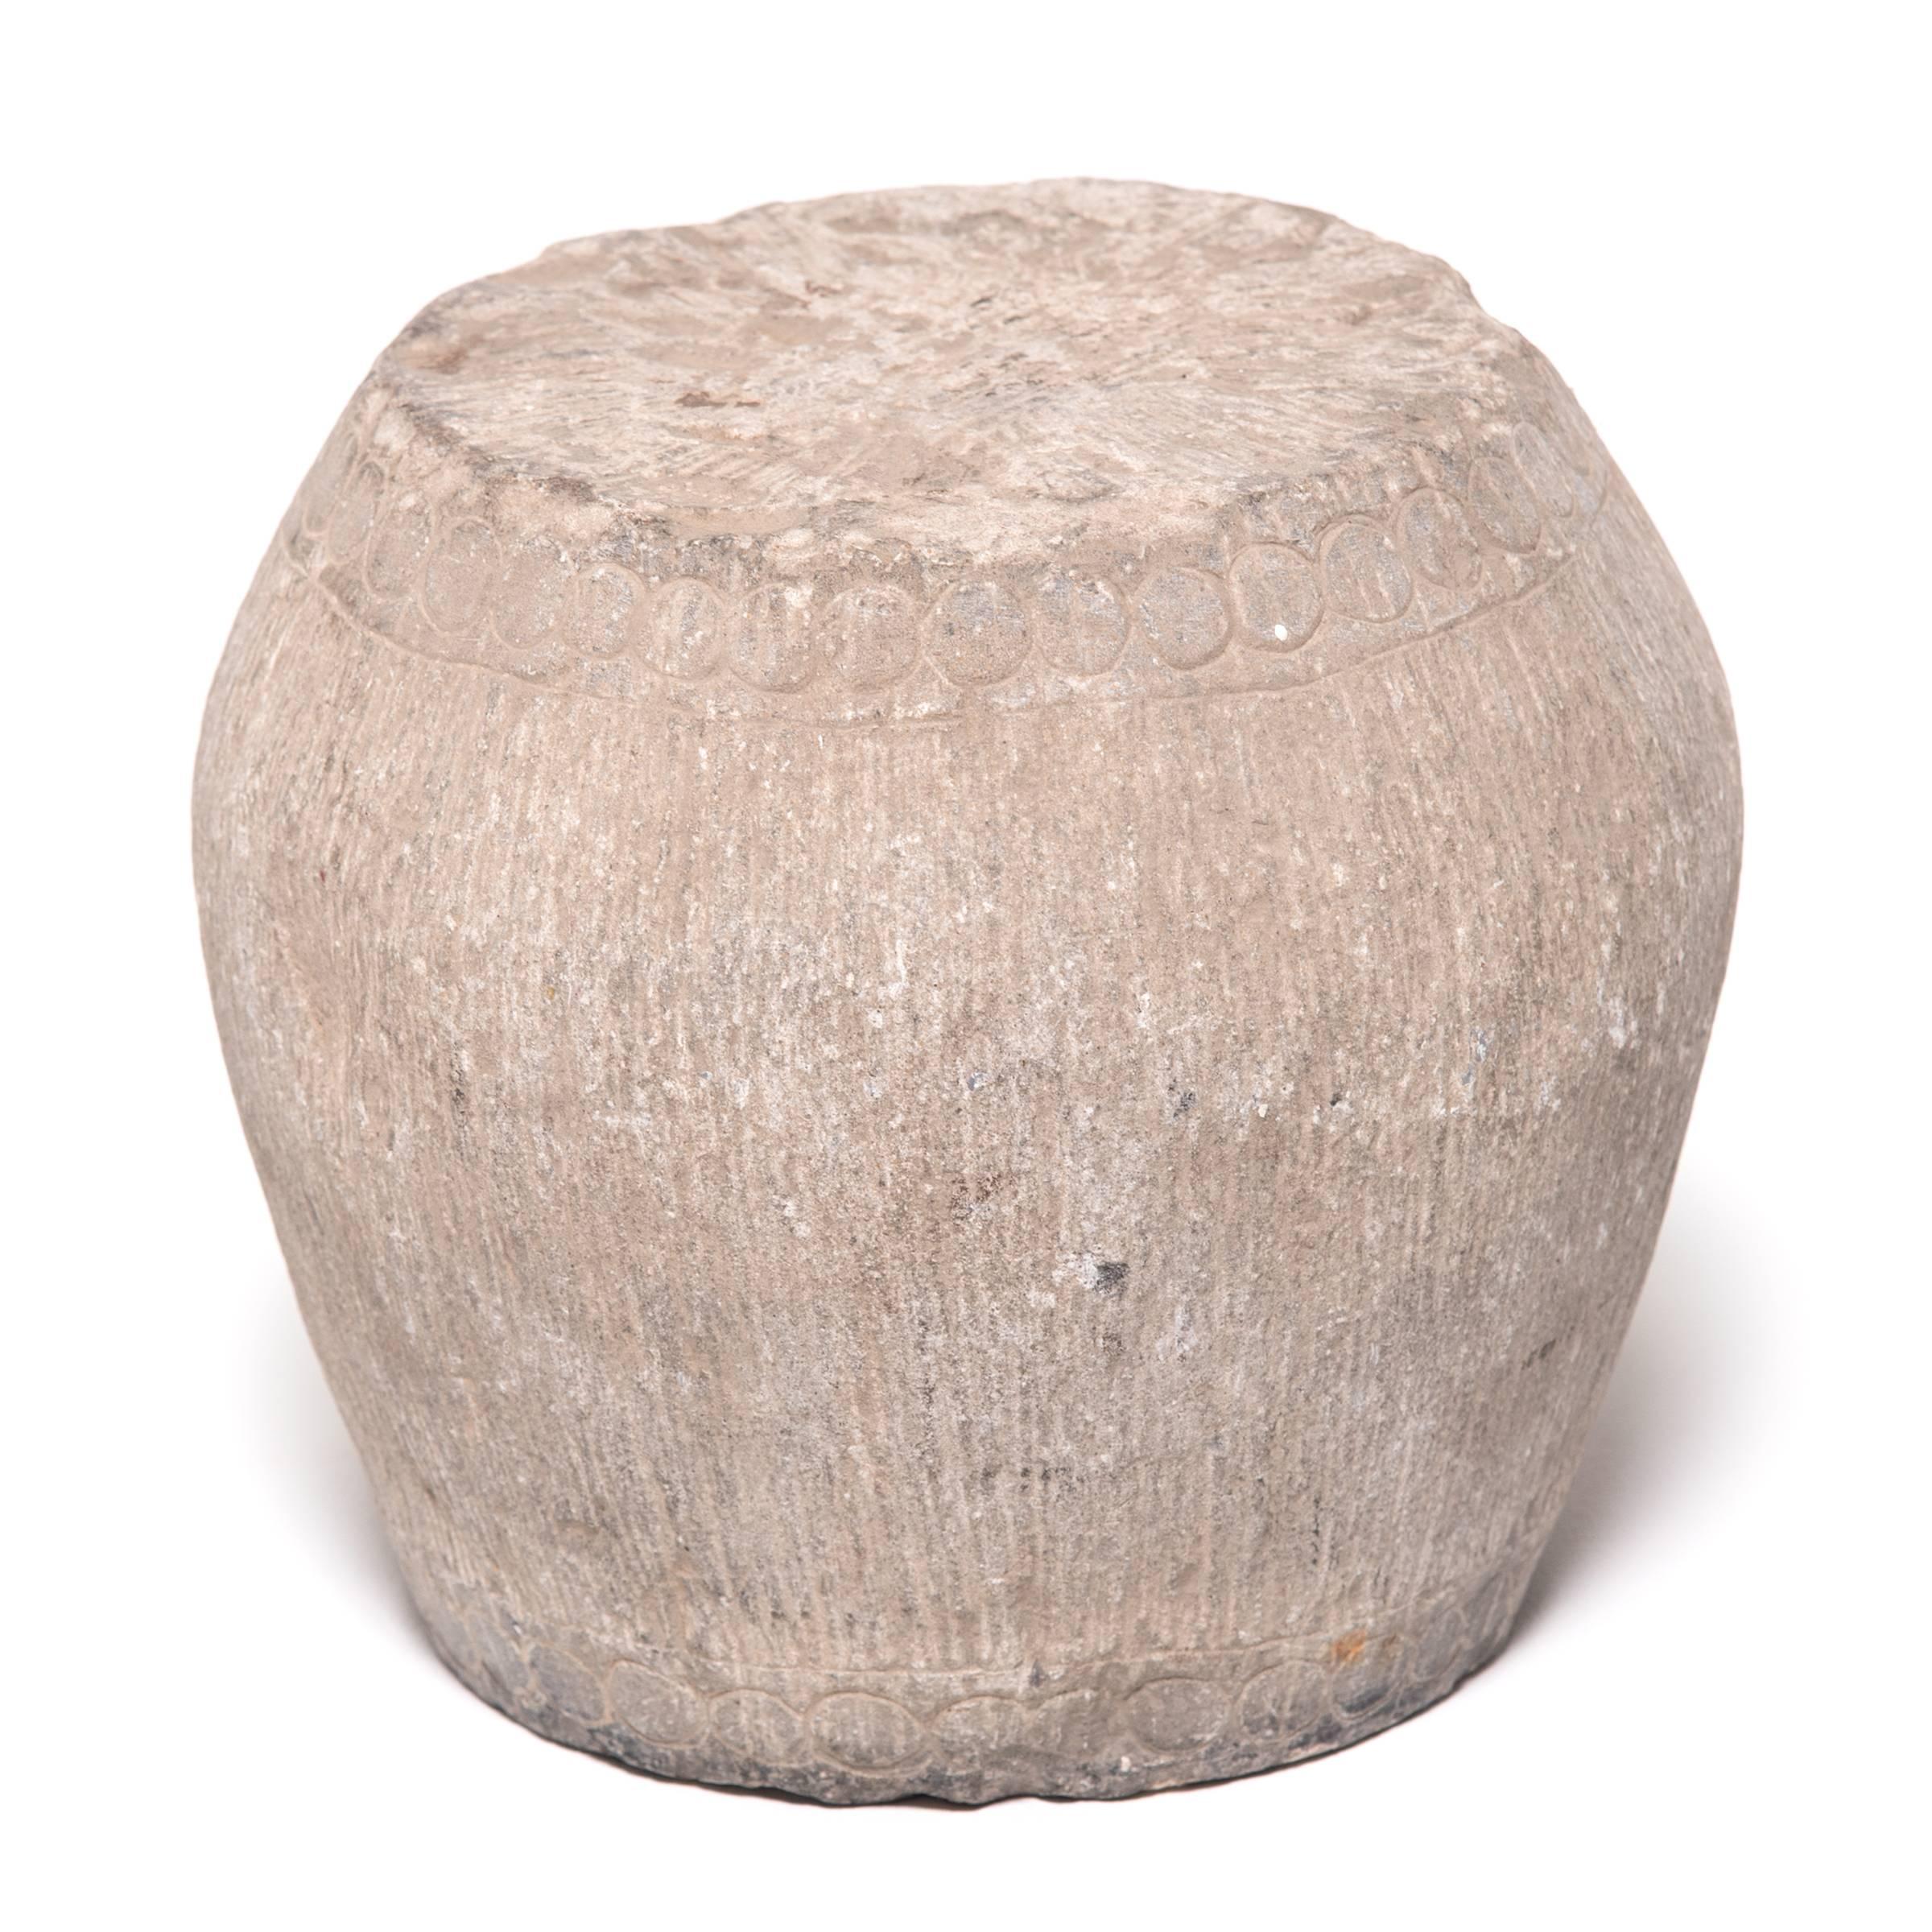 Look closely and you can just make out the hand-carved details that once made this small stone stool resemble a drum. A ring of circles along the top and bottom imitates bosshead nails used to stretch a skin on an actual drum, and thin vertical